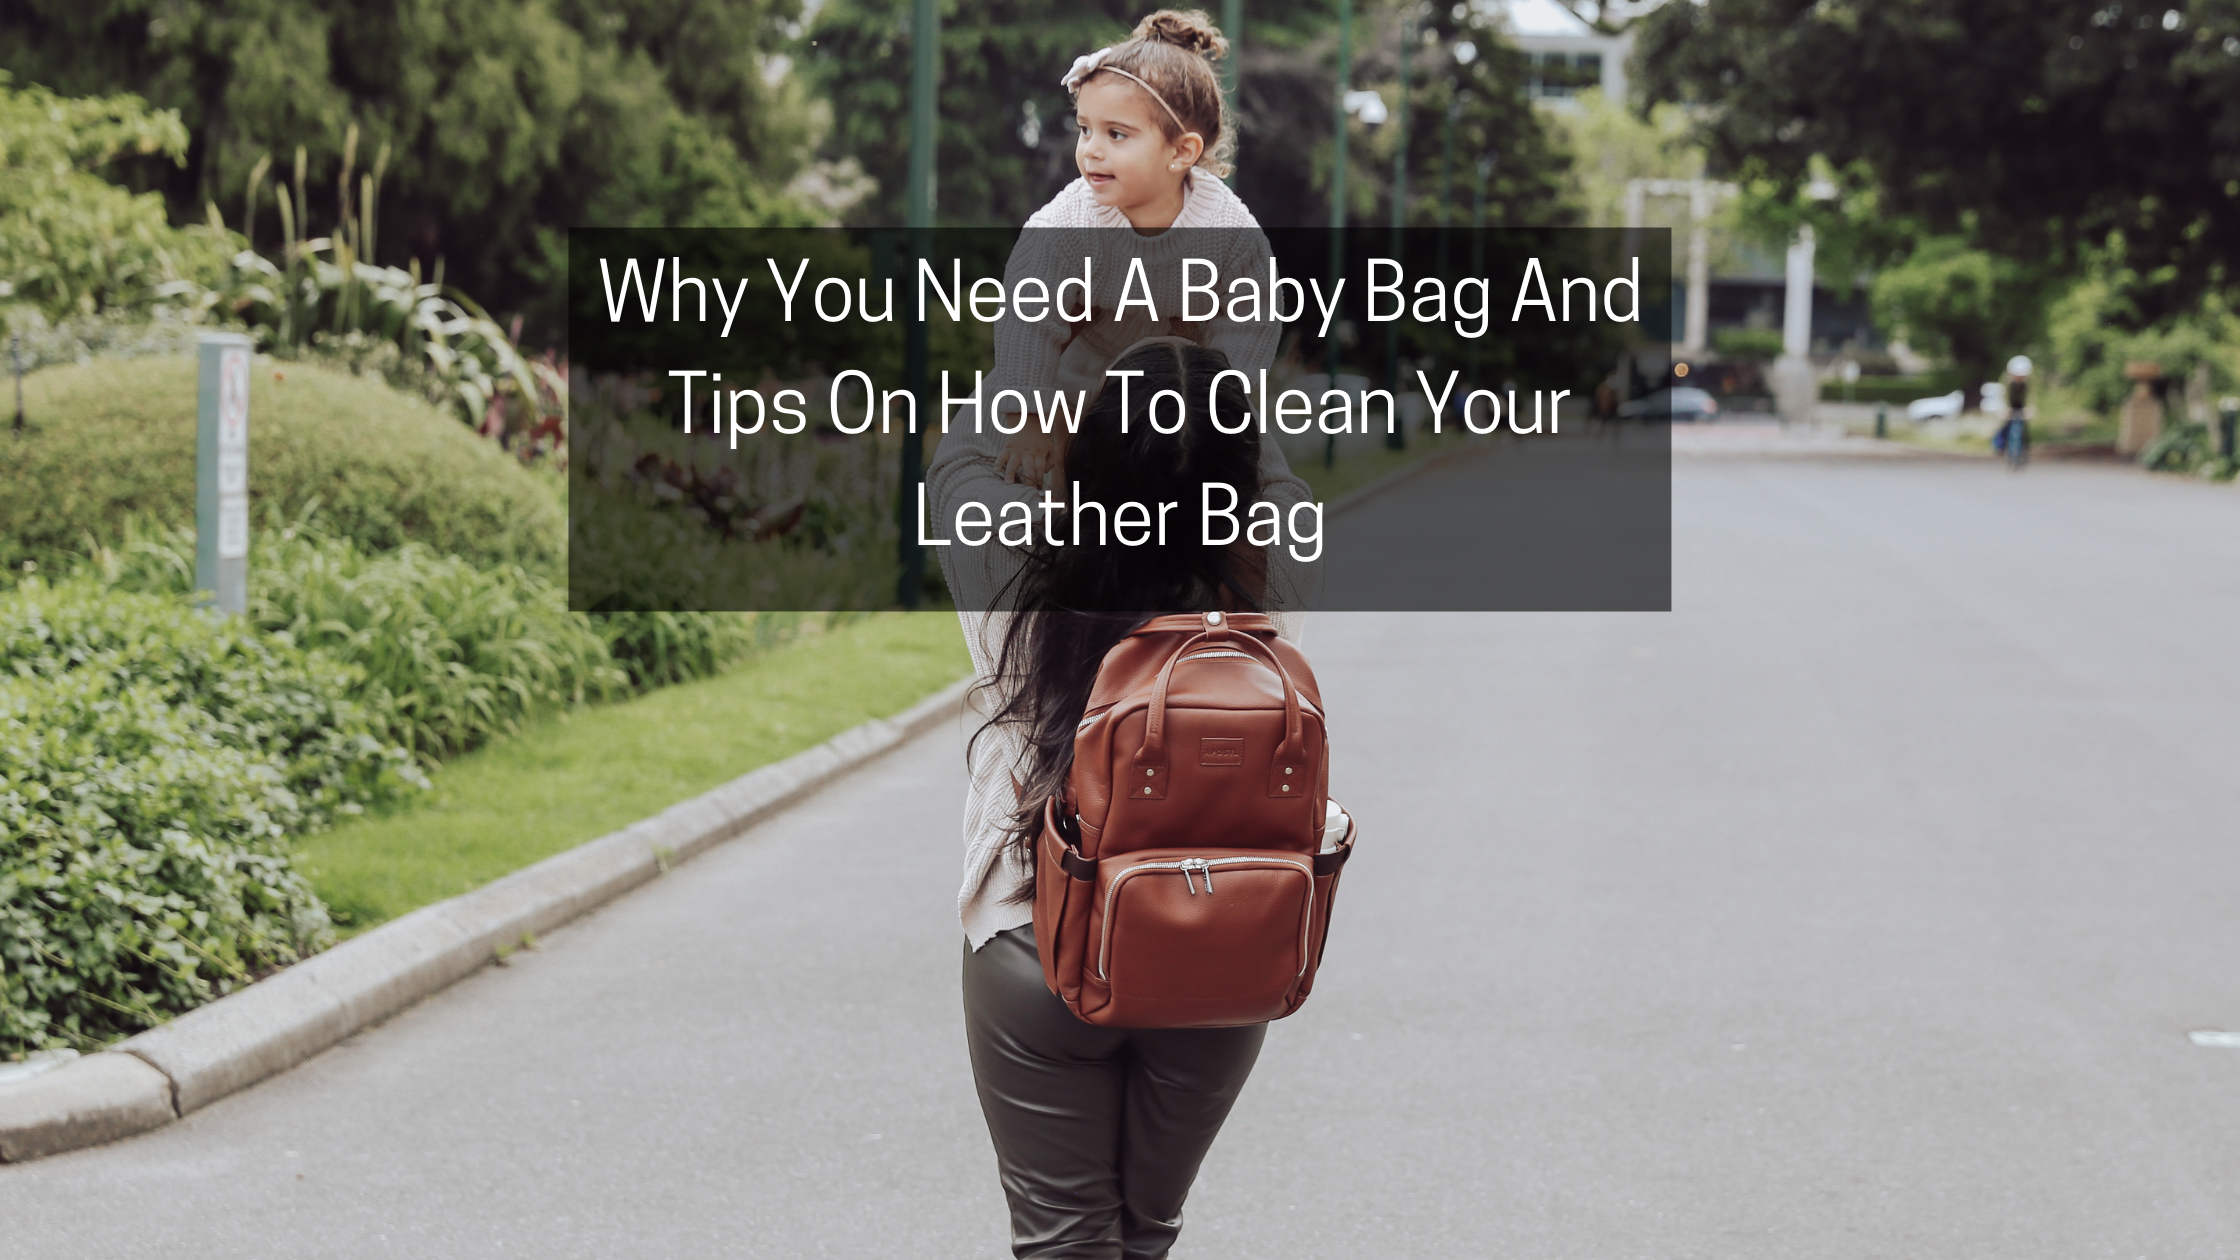 How To Clean Leather Bag? The Best Way You Can Clean Your